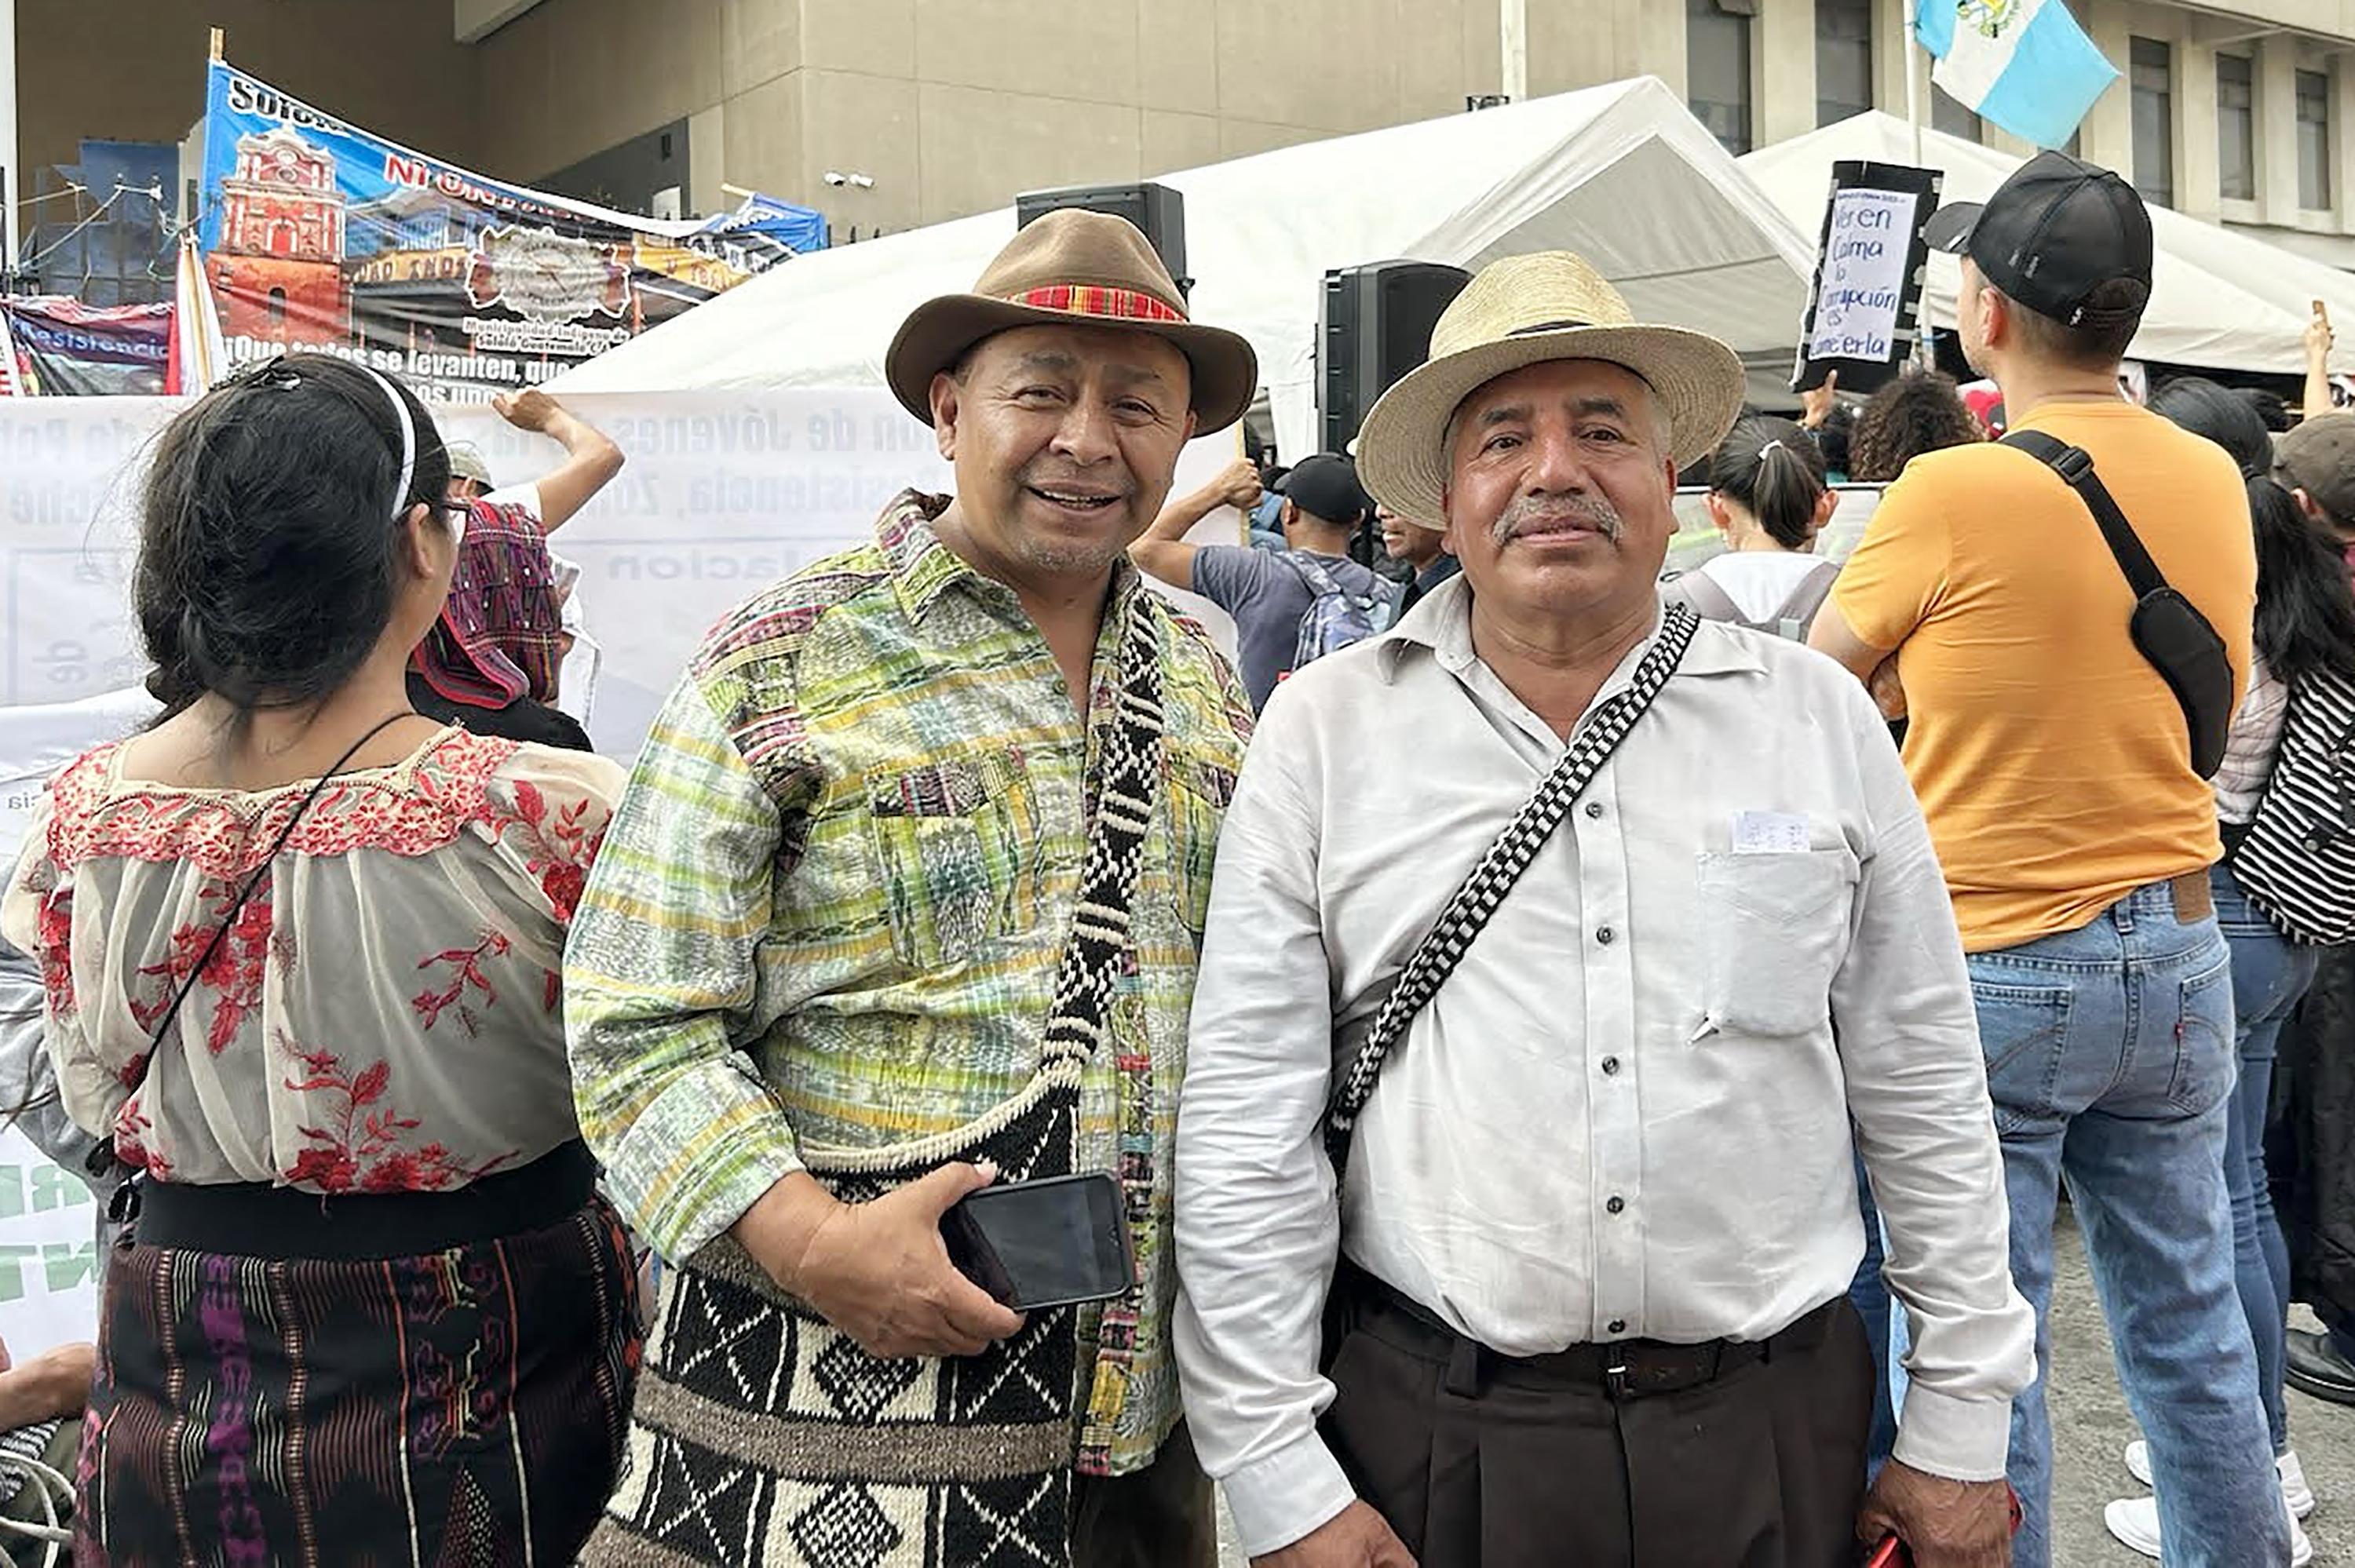 Domingo Xitumul (left) and Andrés Pablo joined a demonstration of hundreds of people in front of the Public Prosecutor’s Office on Saturday, January 13, 2024, to commemorate more than 100 days of Indigenous protests in favor of the election results and a peaceful transition of power. Photo Roman Gressier